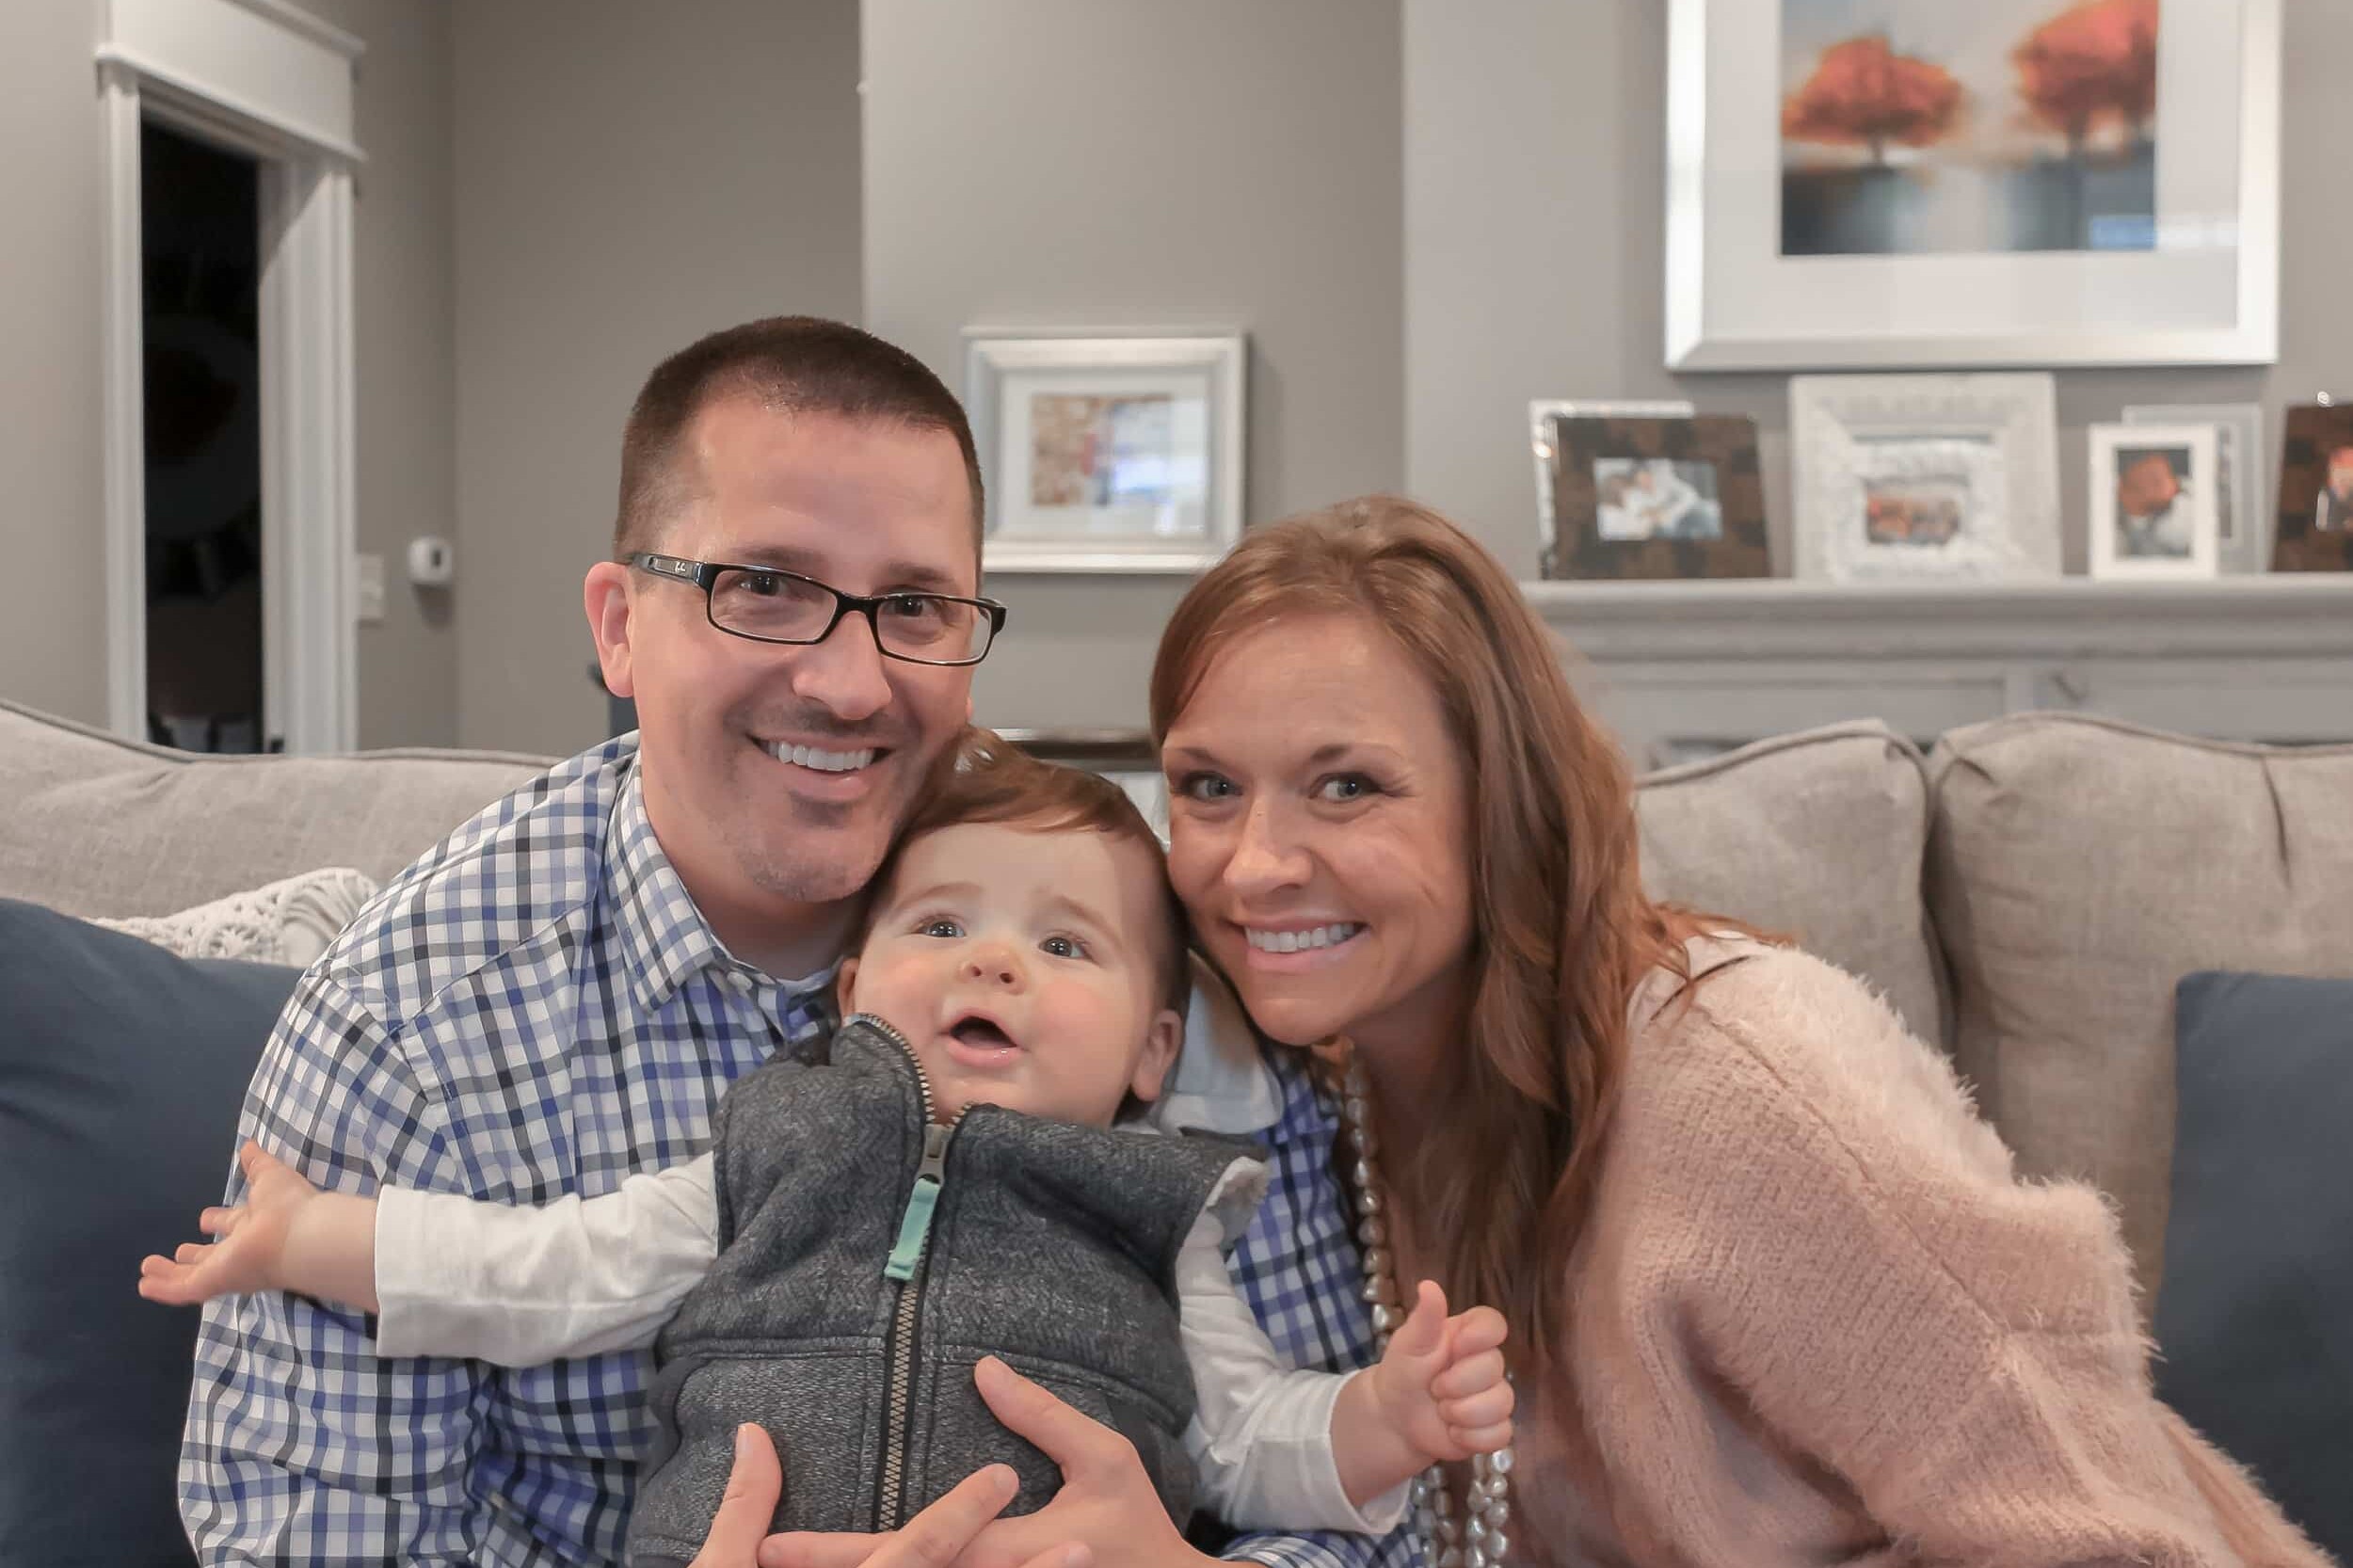 A man and woman cradling a baby on a couch in their new custom home.